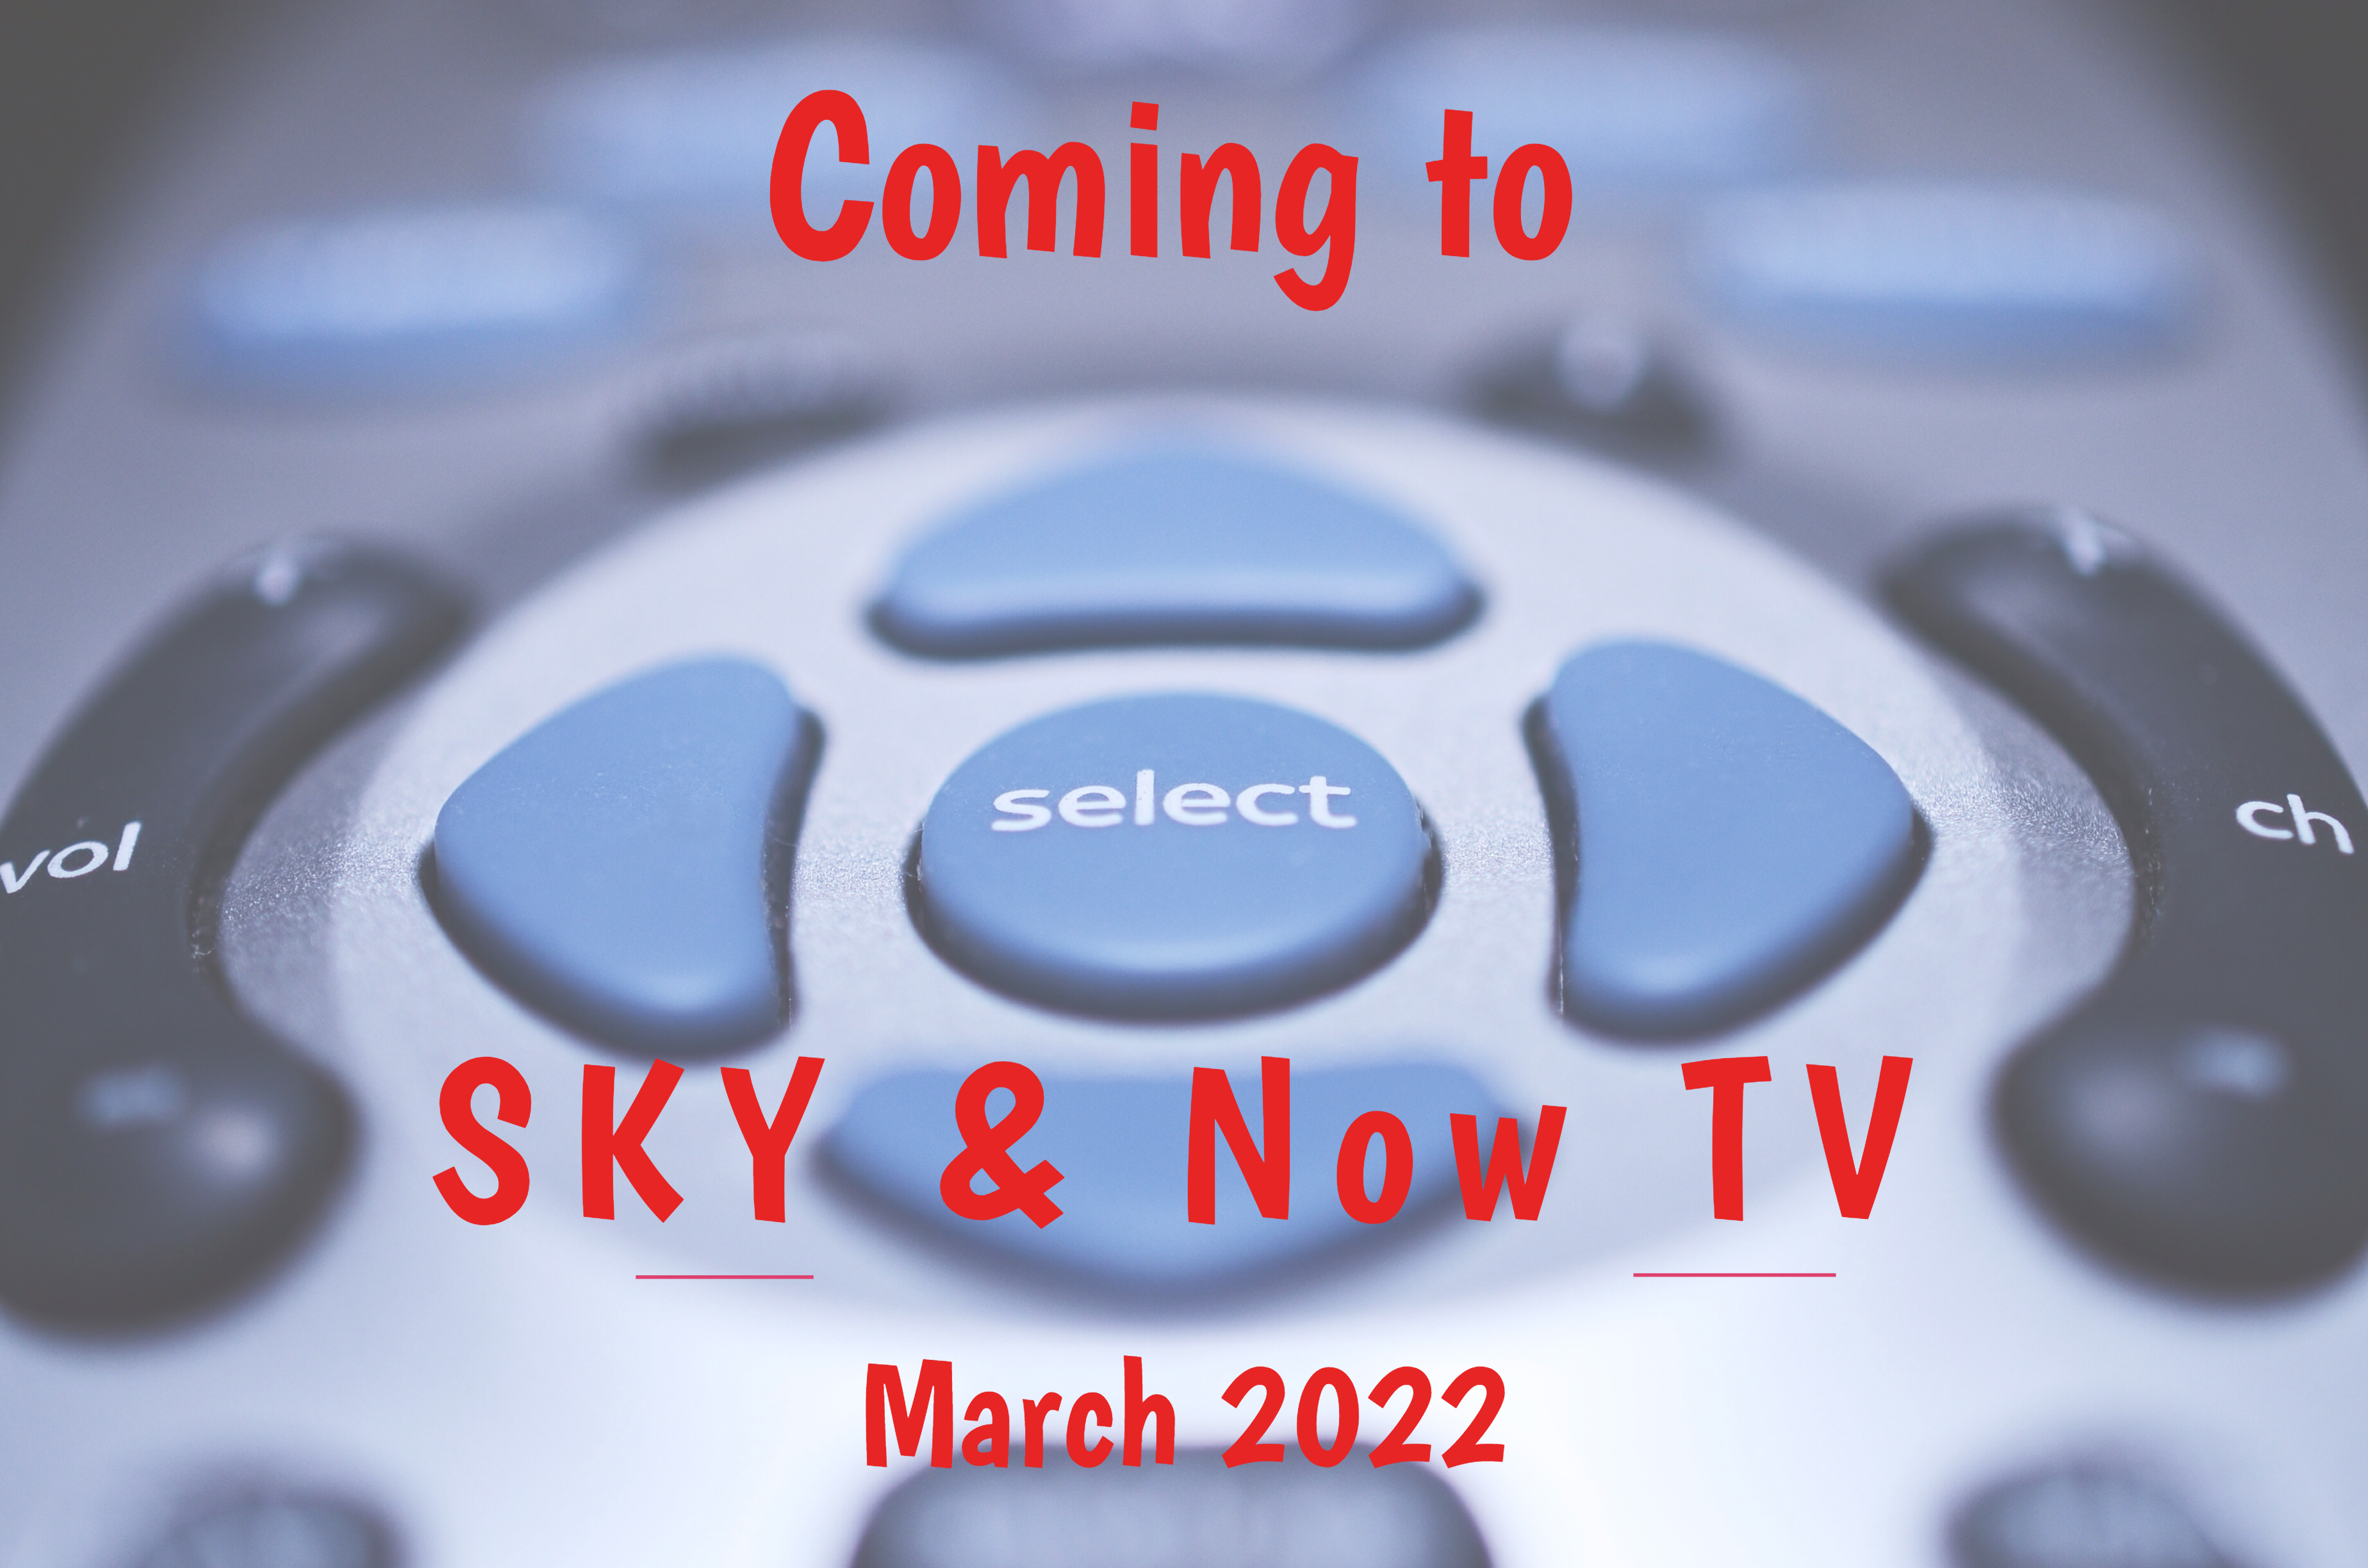 Coming to Sky & Now TV in March 2022